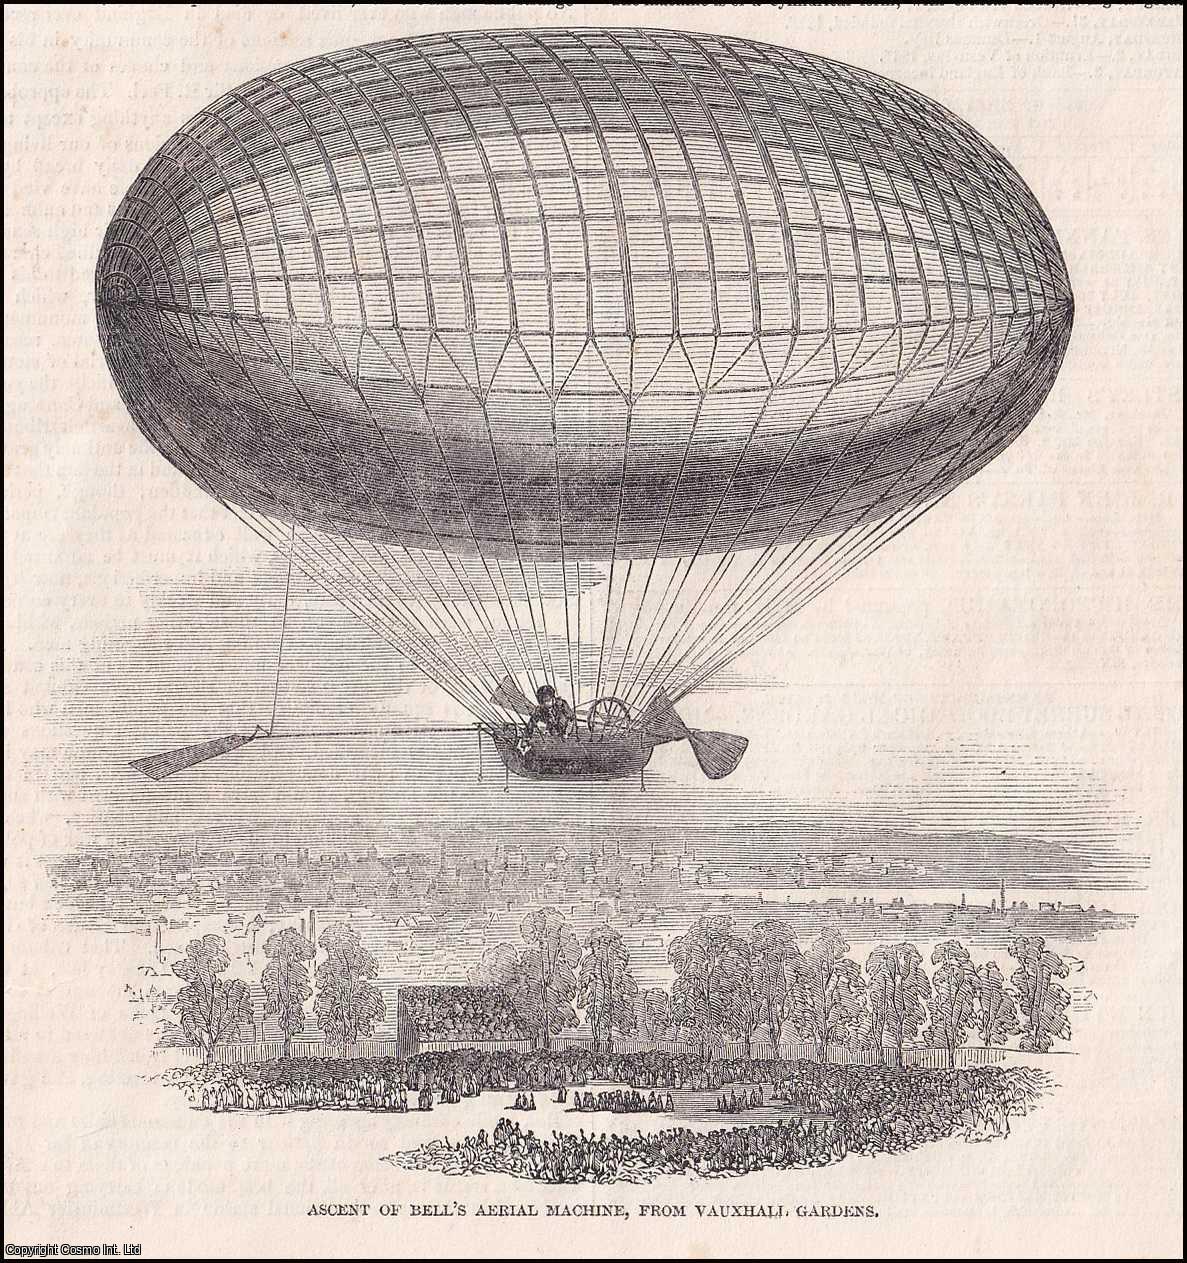 BALLOONING - Bell's Aerial Machine at Vauxhall Gardens. An original print from the Illustrated London News, 1850.